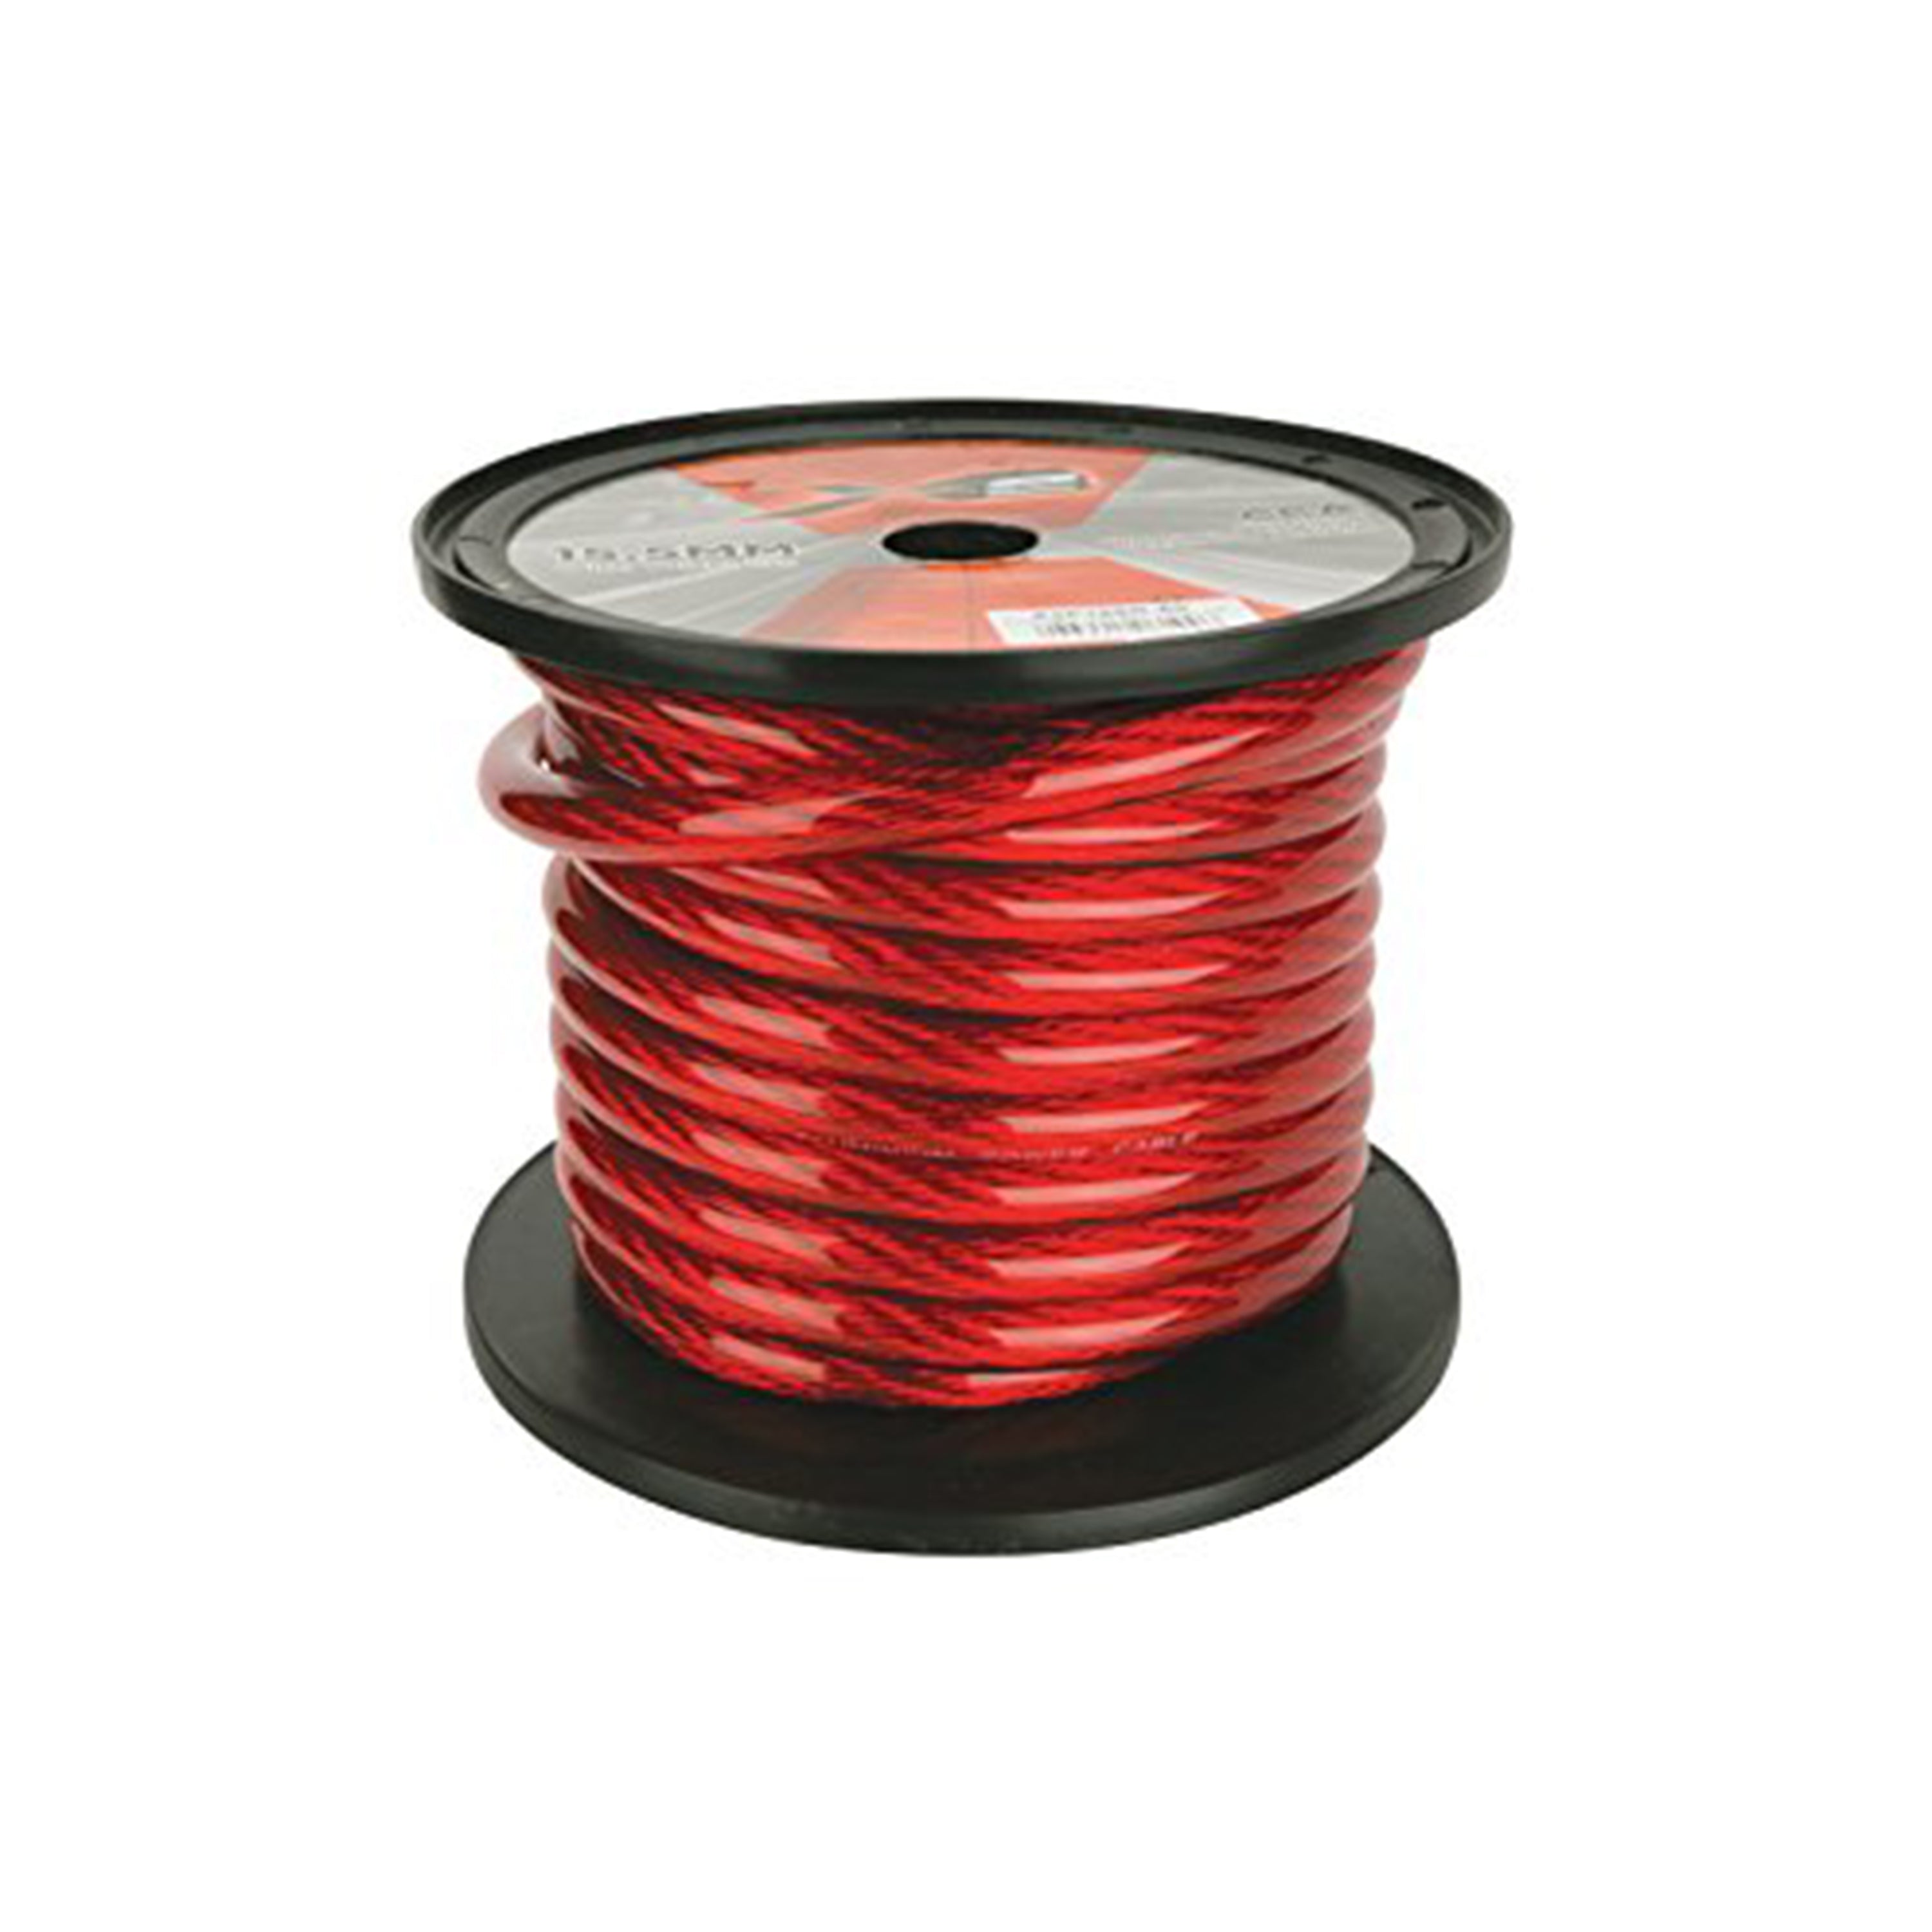 X2 by Scosche X2P95R-100, 9.5mm Red Power Wire Spool - 100 Ft.